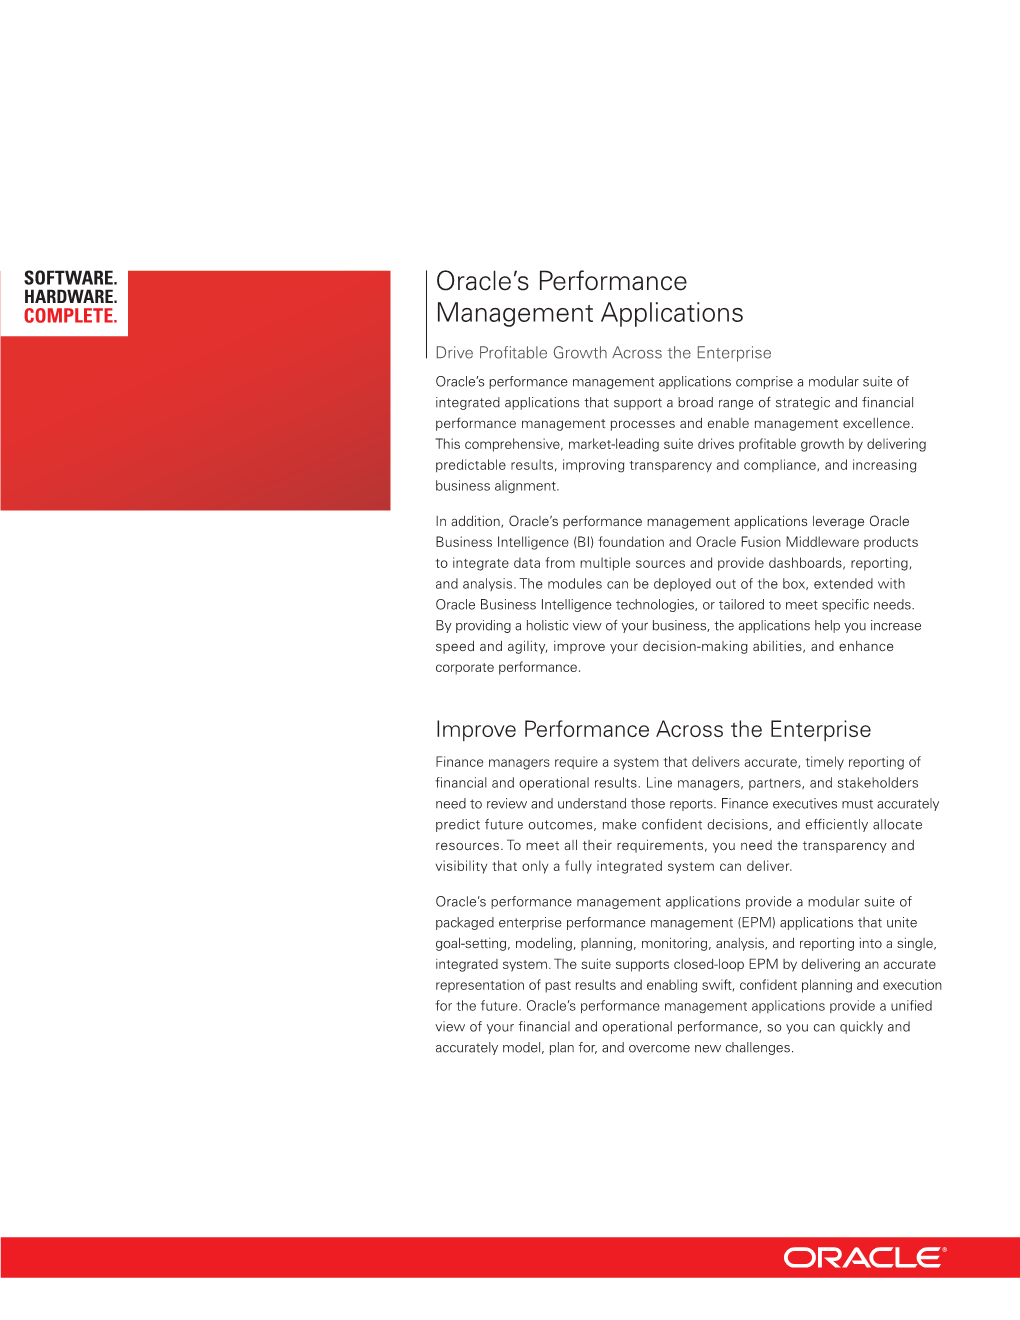 Oracle's Performance Management Applications